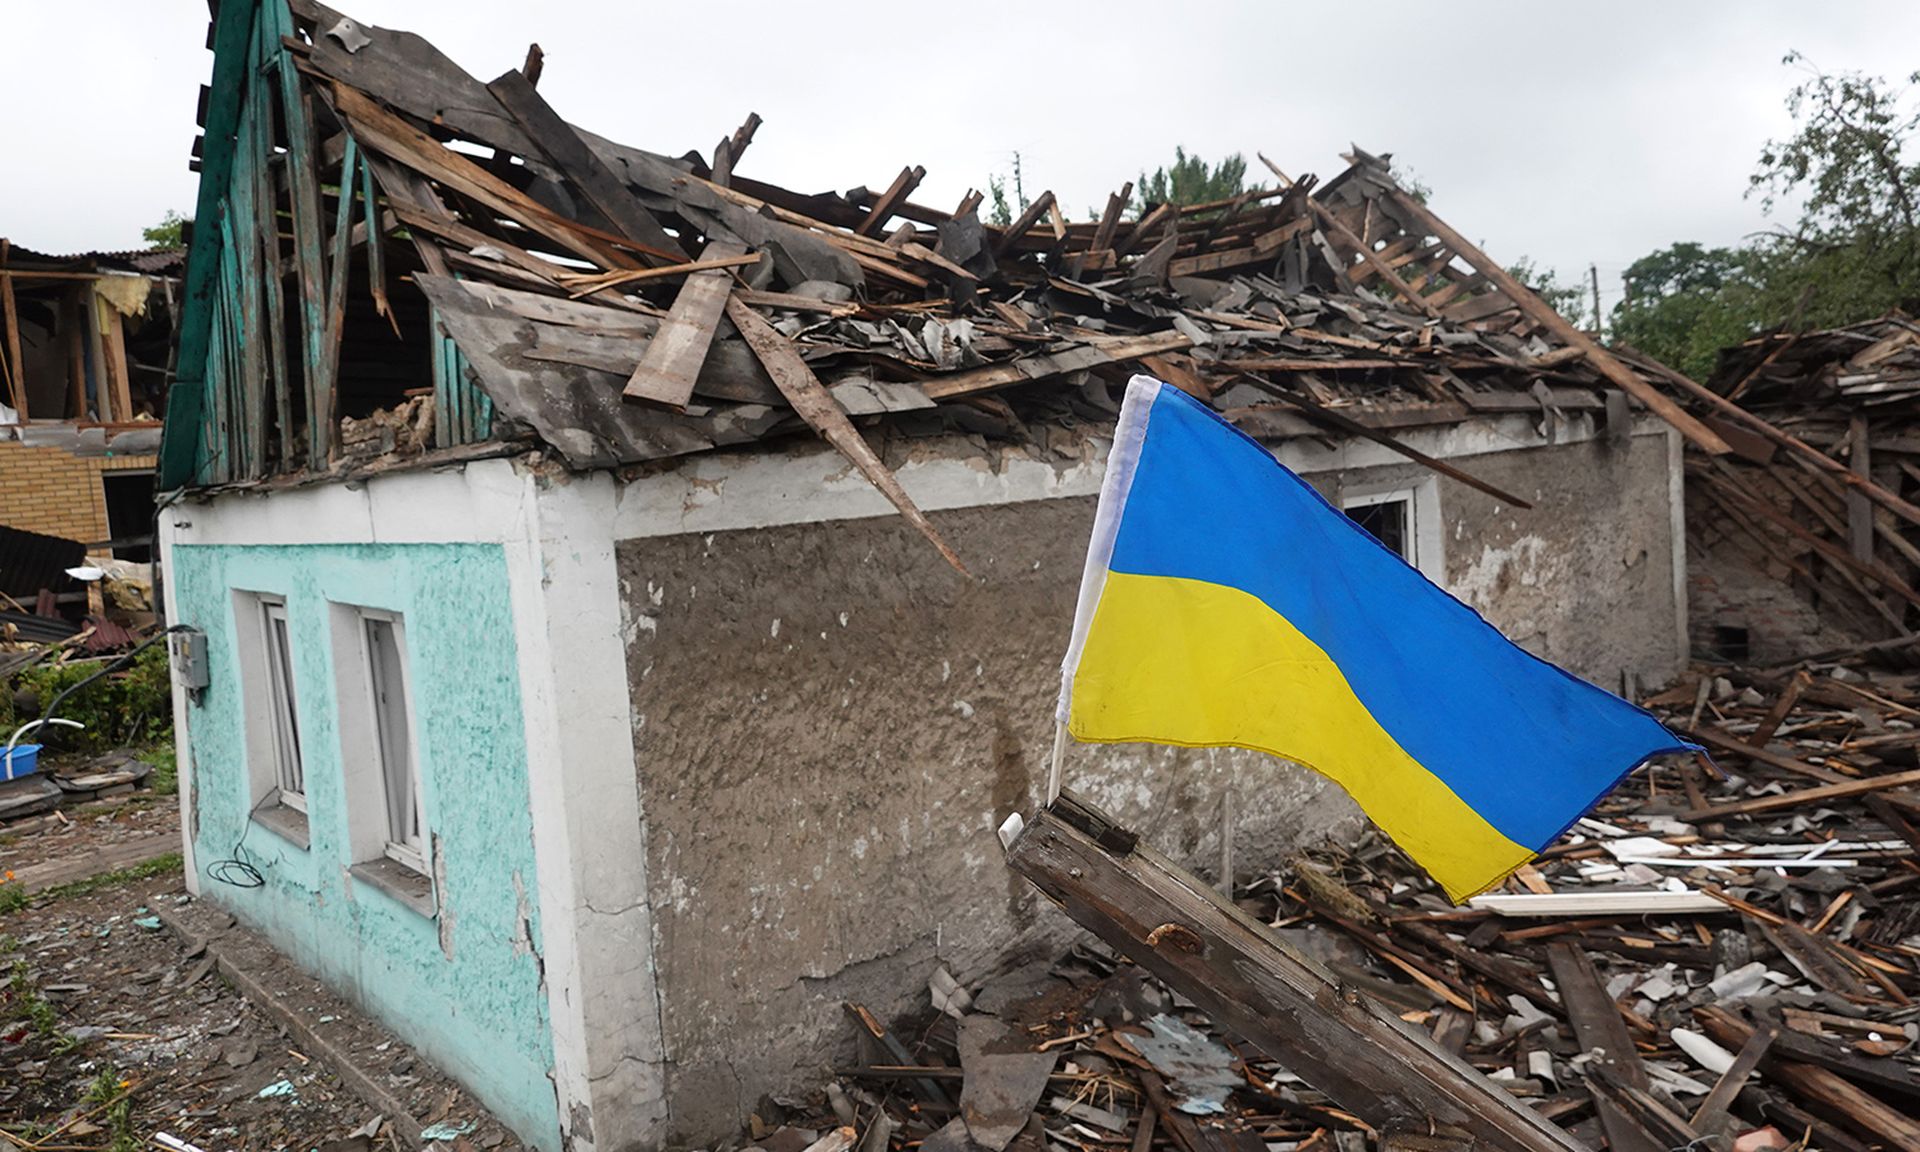 A Ukrainian flag flies next to a home that was heavily damaged by a Russian rocket attack on June 15, 2022, in Dobropillia, Ukraine. (Photo by Scott Olson/Getty Images)